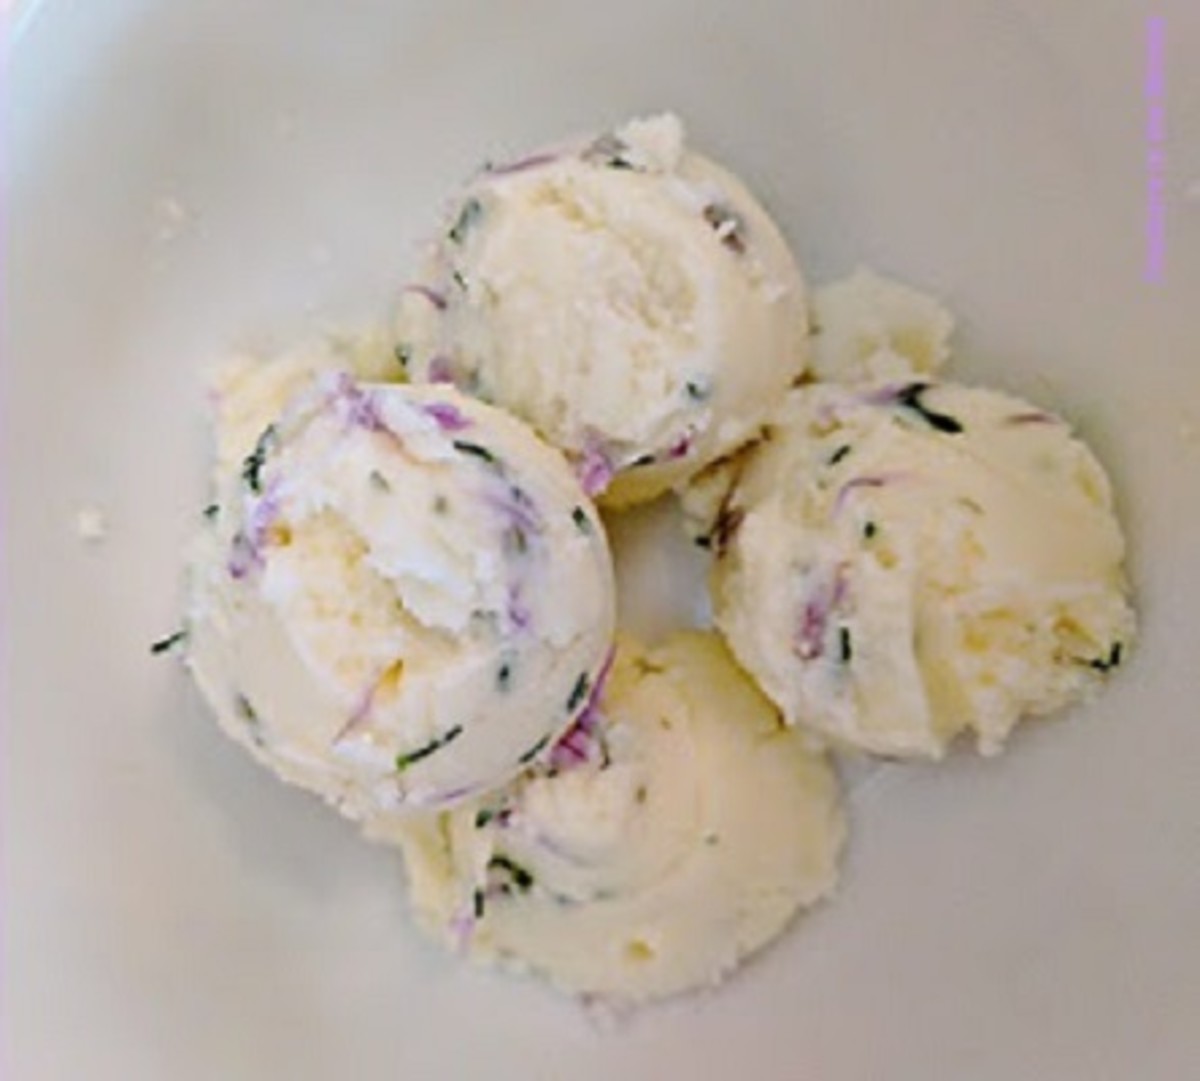 Chive blossom butter